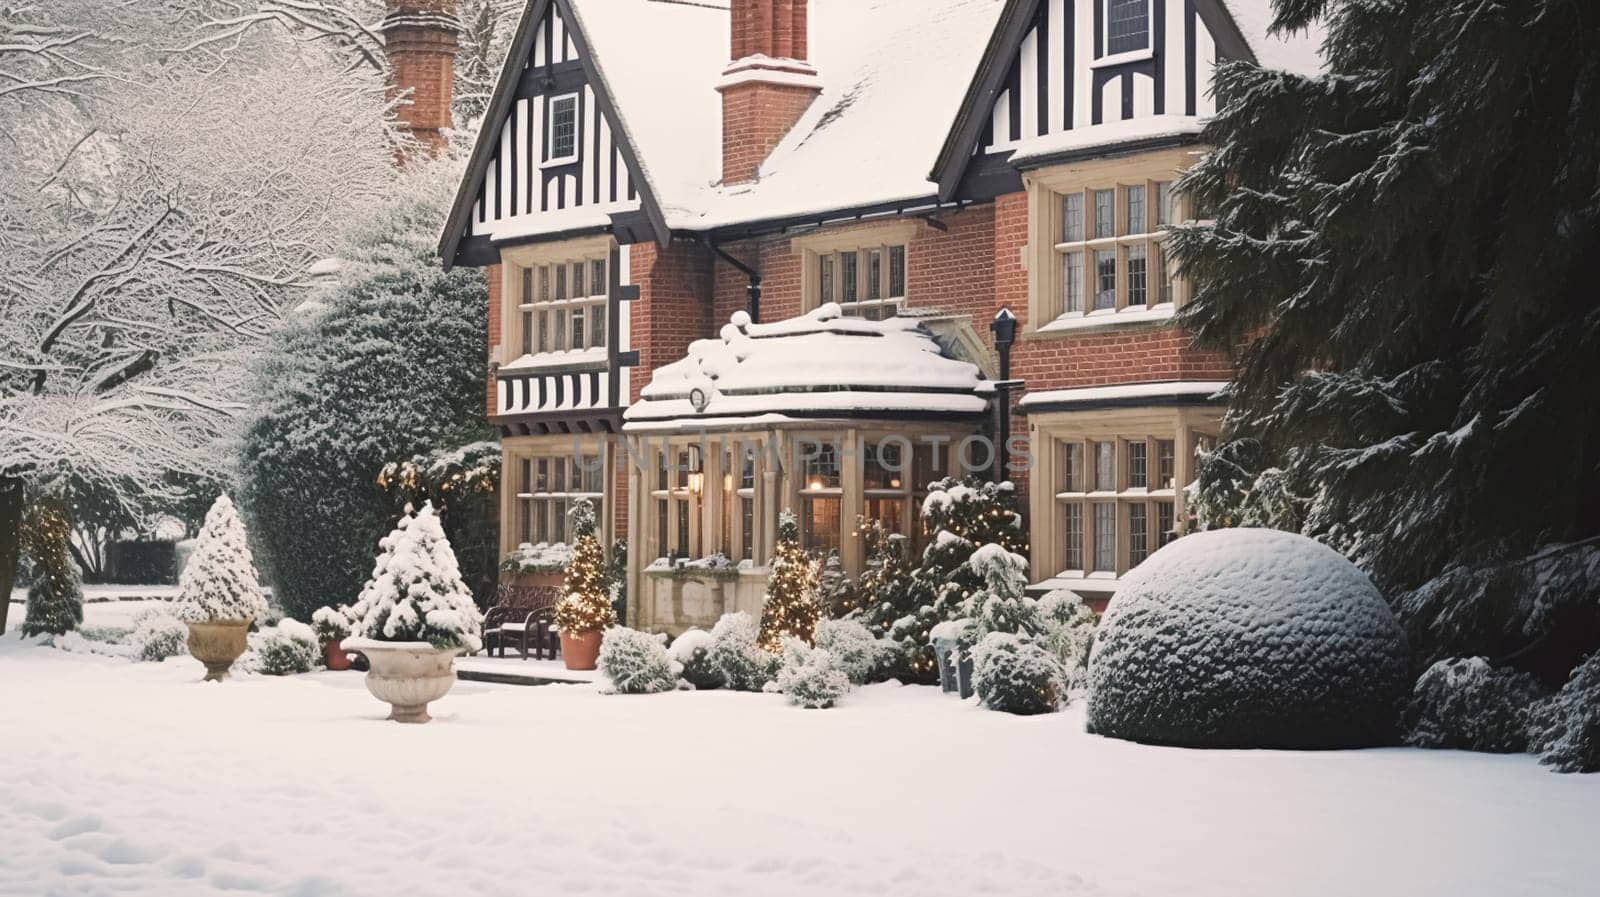 Christmas at the manor, English countryside style estate in winter with garden and festive exterior landscape decor